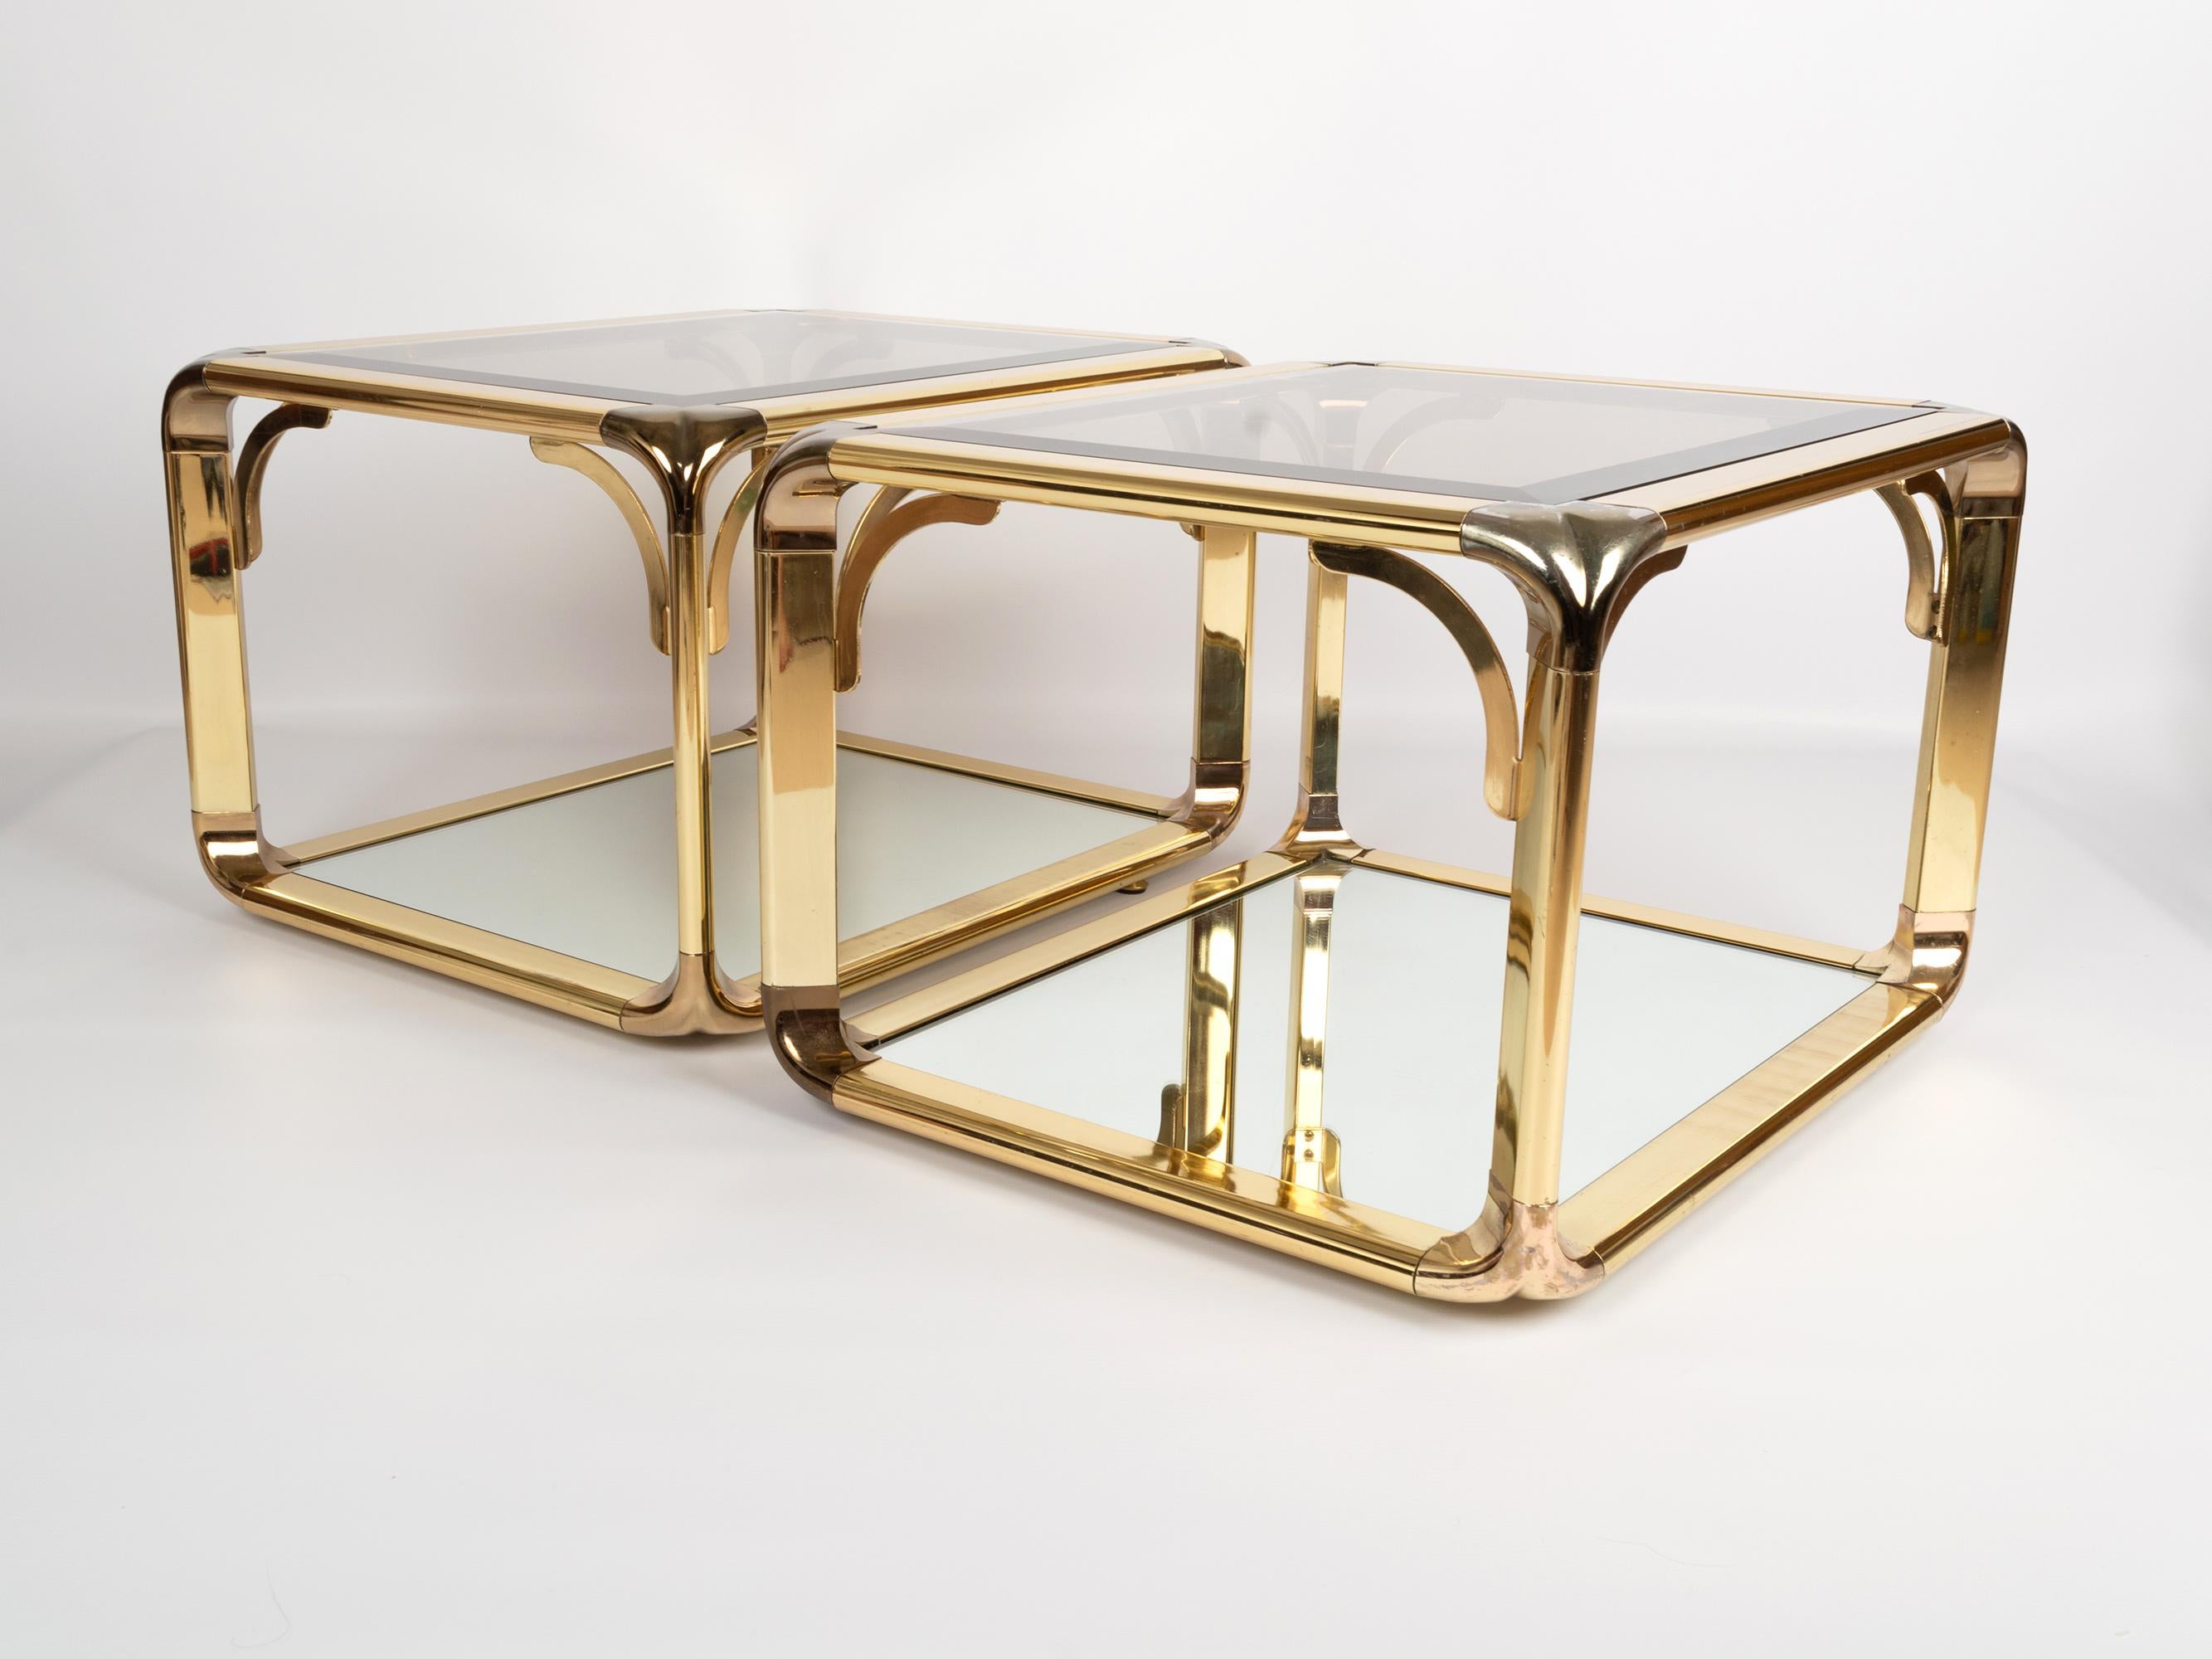 Pair of mirrored gold chrome two-tier end tables by Belgo Chrome, Belgium, circa 1970. Smoked glass top with a mirrored lower tier.
In excellent vintage condition commensurate of age.